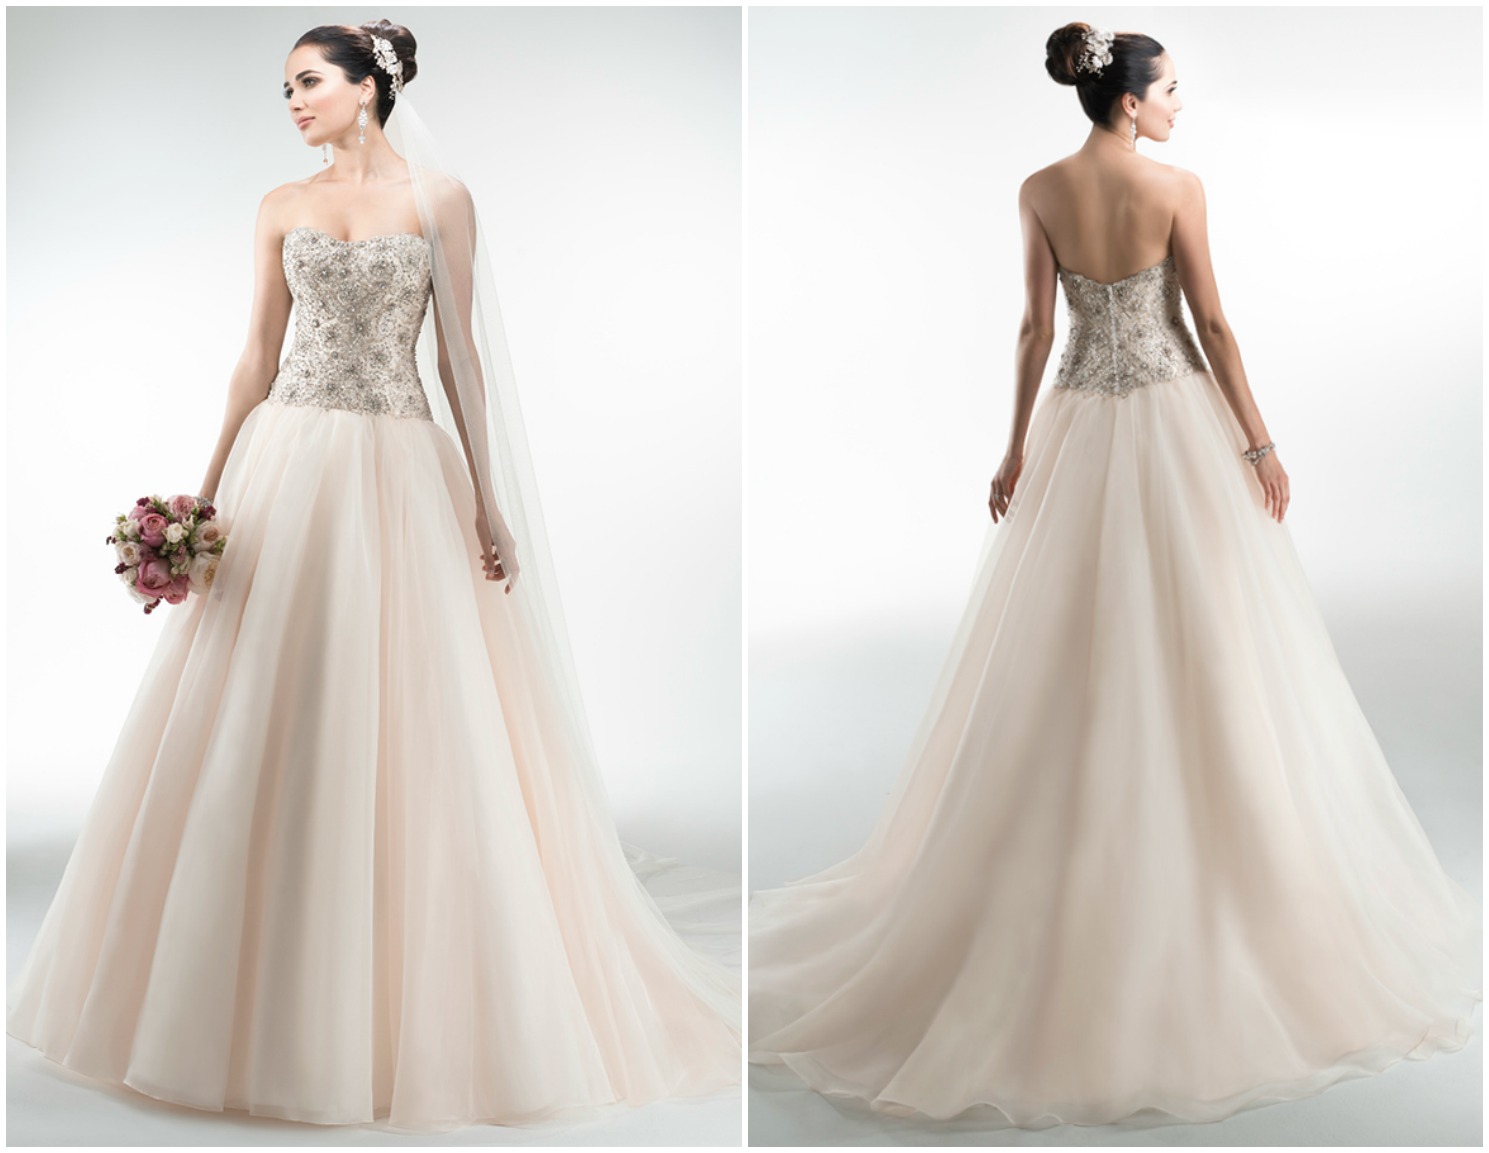 <a href="http://www.maggiesottero.com/dress.aspx?style=4MS971" target="_blank">Maggie Sottero</a>